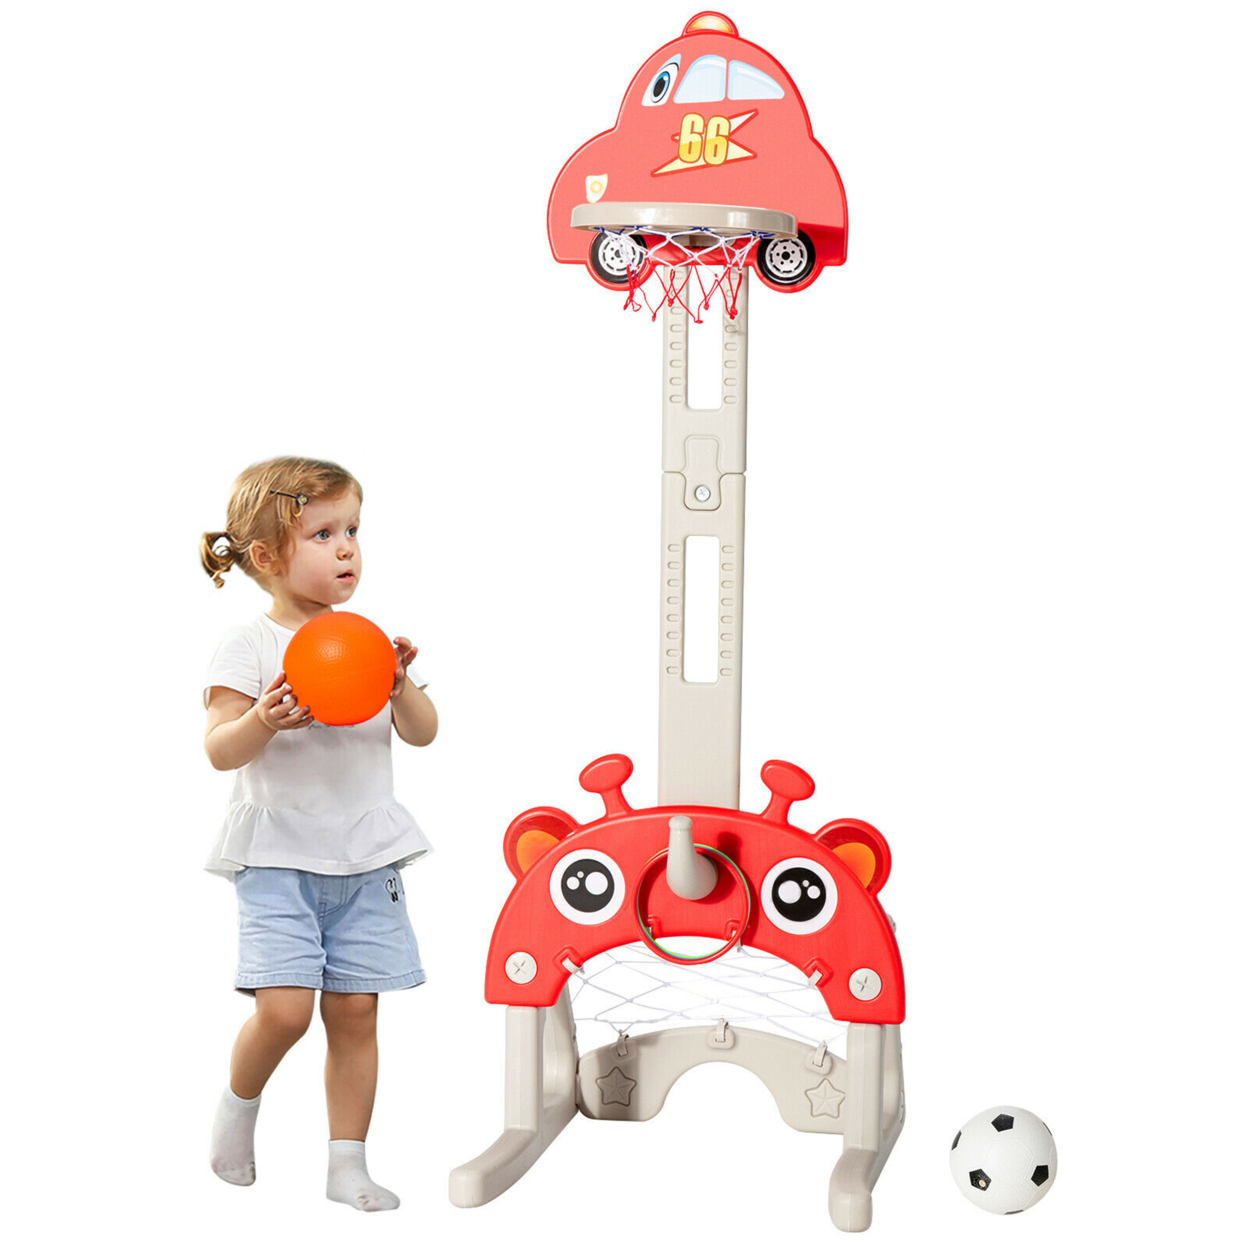 3-in-1 Basketball Hoop For Kids Adjustable Height Playset W/ Balls Red